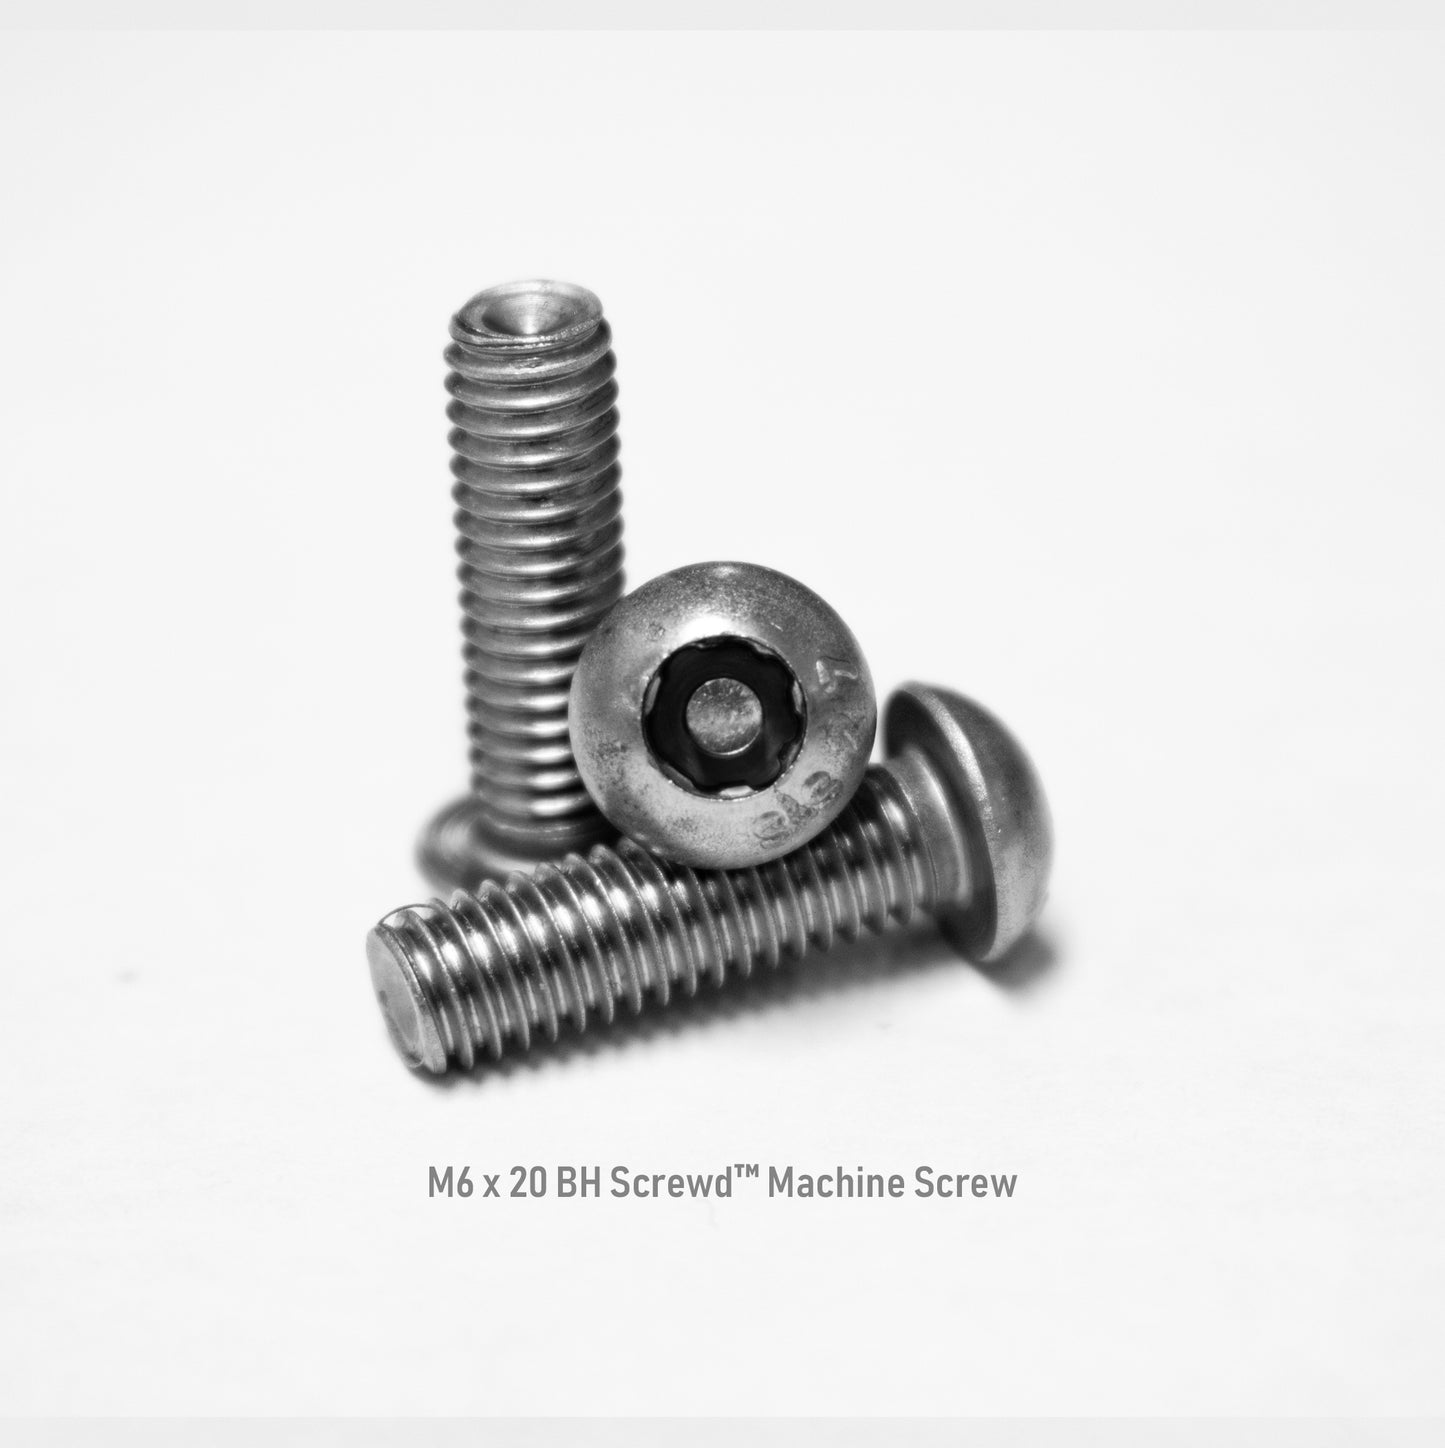 M6 x 20 Button Head Screwd® Security Metric Machine Screw Made out of Stainless Steel